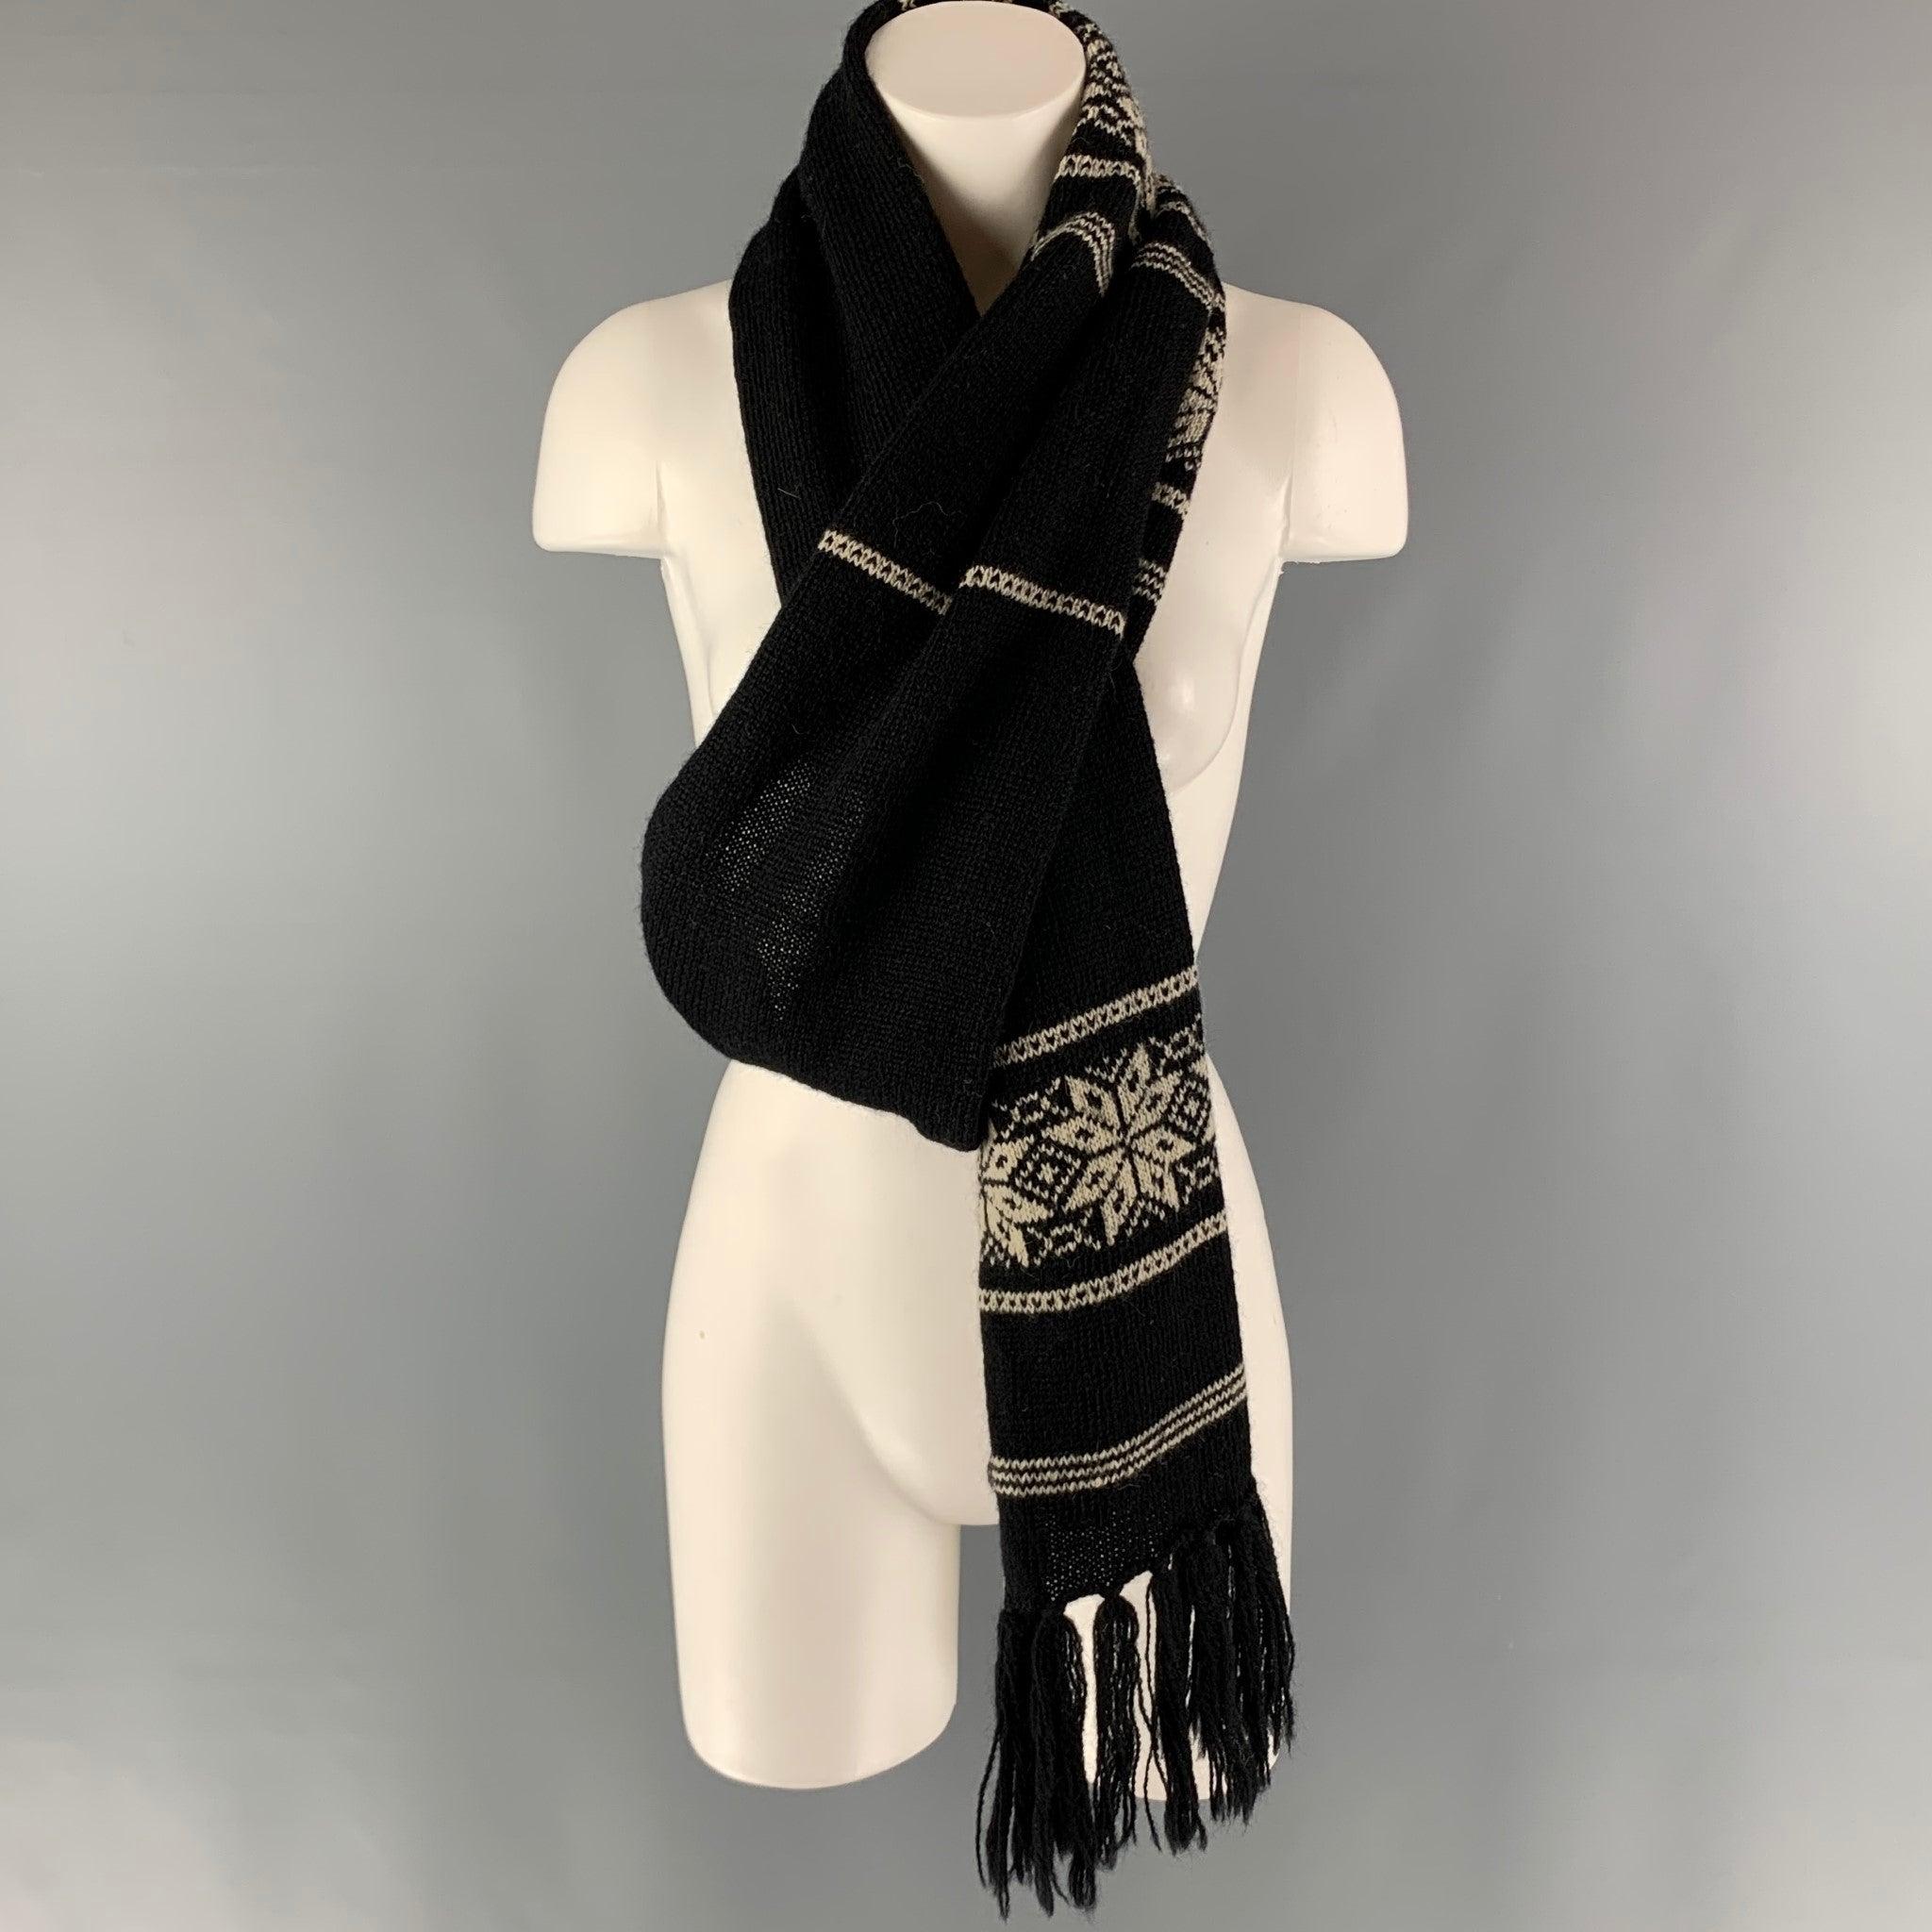 RALPH LAUREN BLUE LABEL scarf comes in a black and cream wool blend knit material featuring a snowflakes motif, and black tassels. Very Good Pre-Owned Condition.Length: 114 inches  Width: 10.5 inches  



  
  
 
Reference: 123949
Category: Scarves